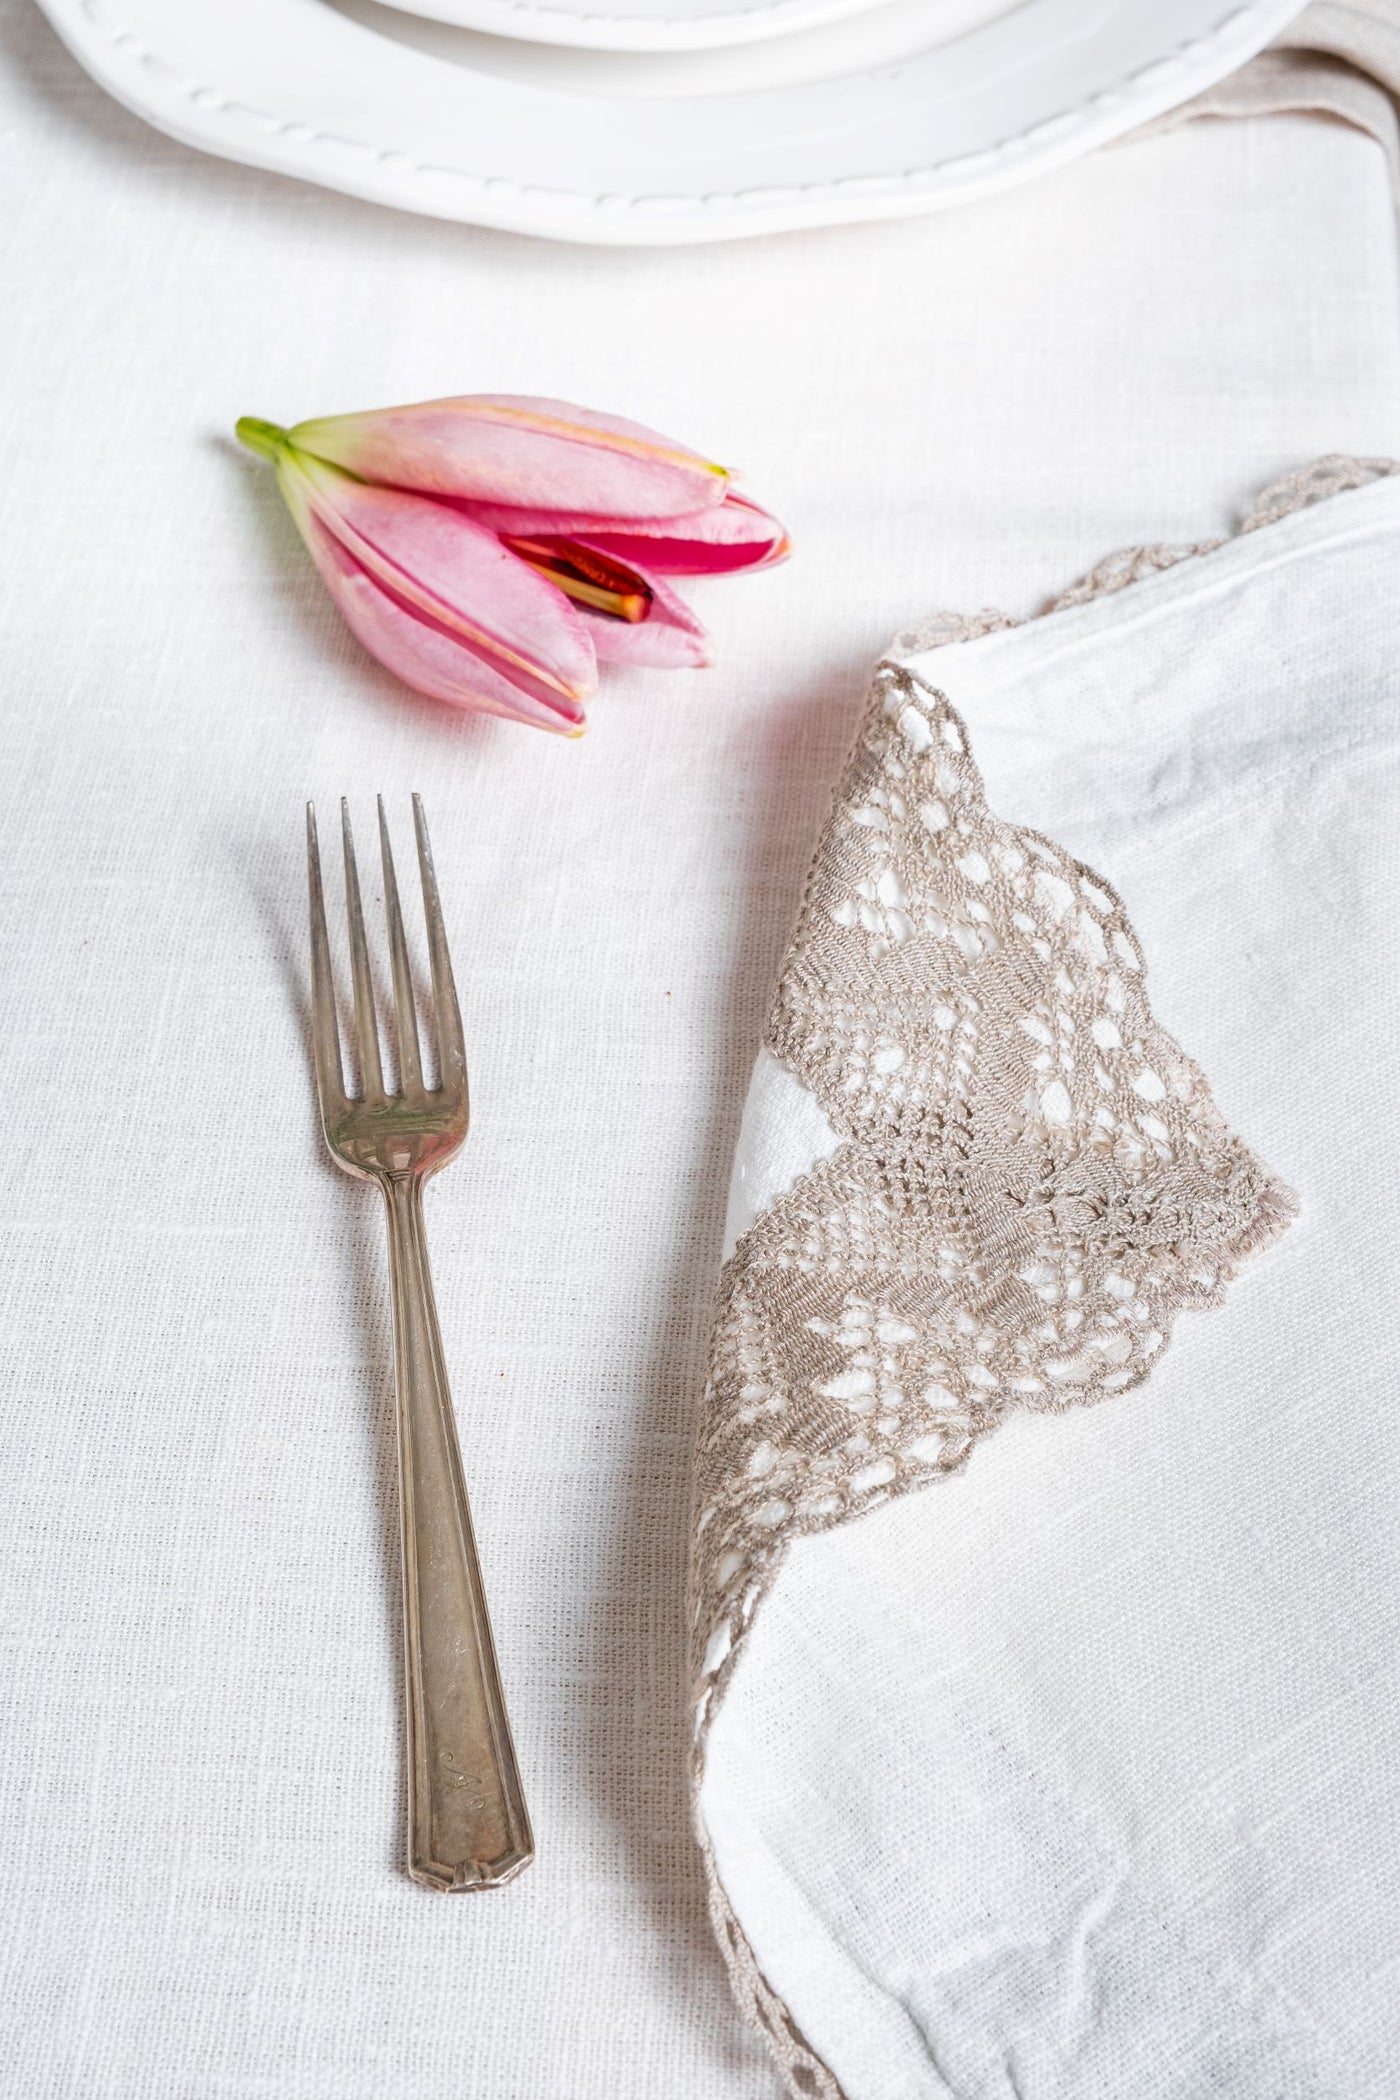 Vintage White Tablecloth with Linen Lace